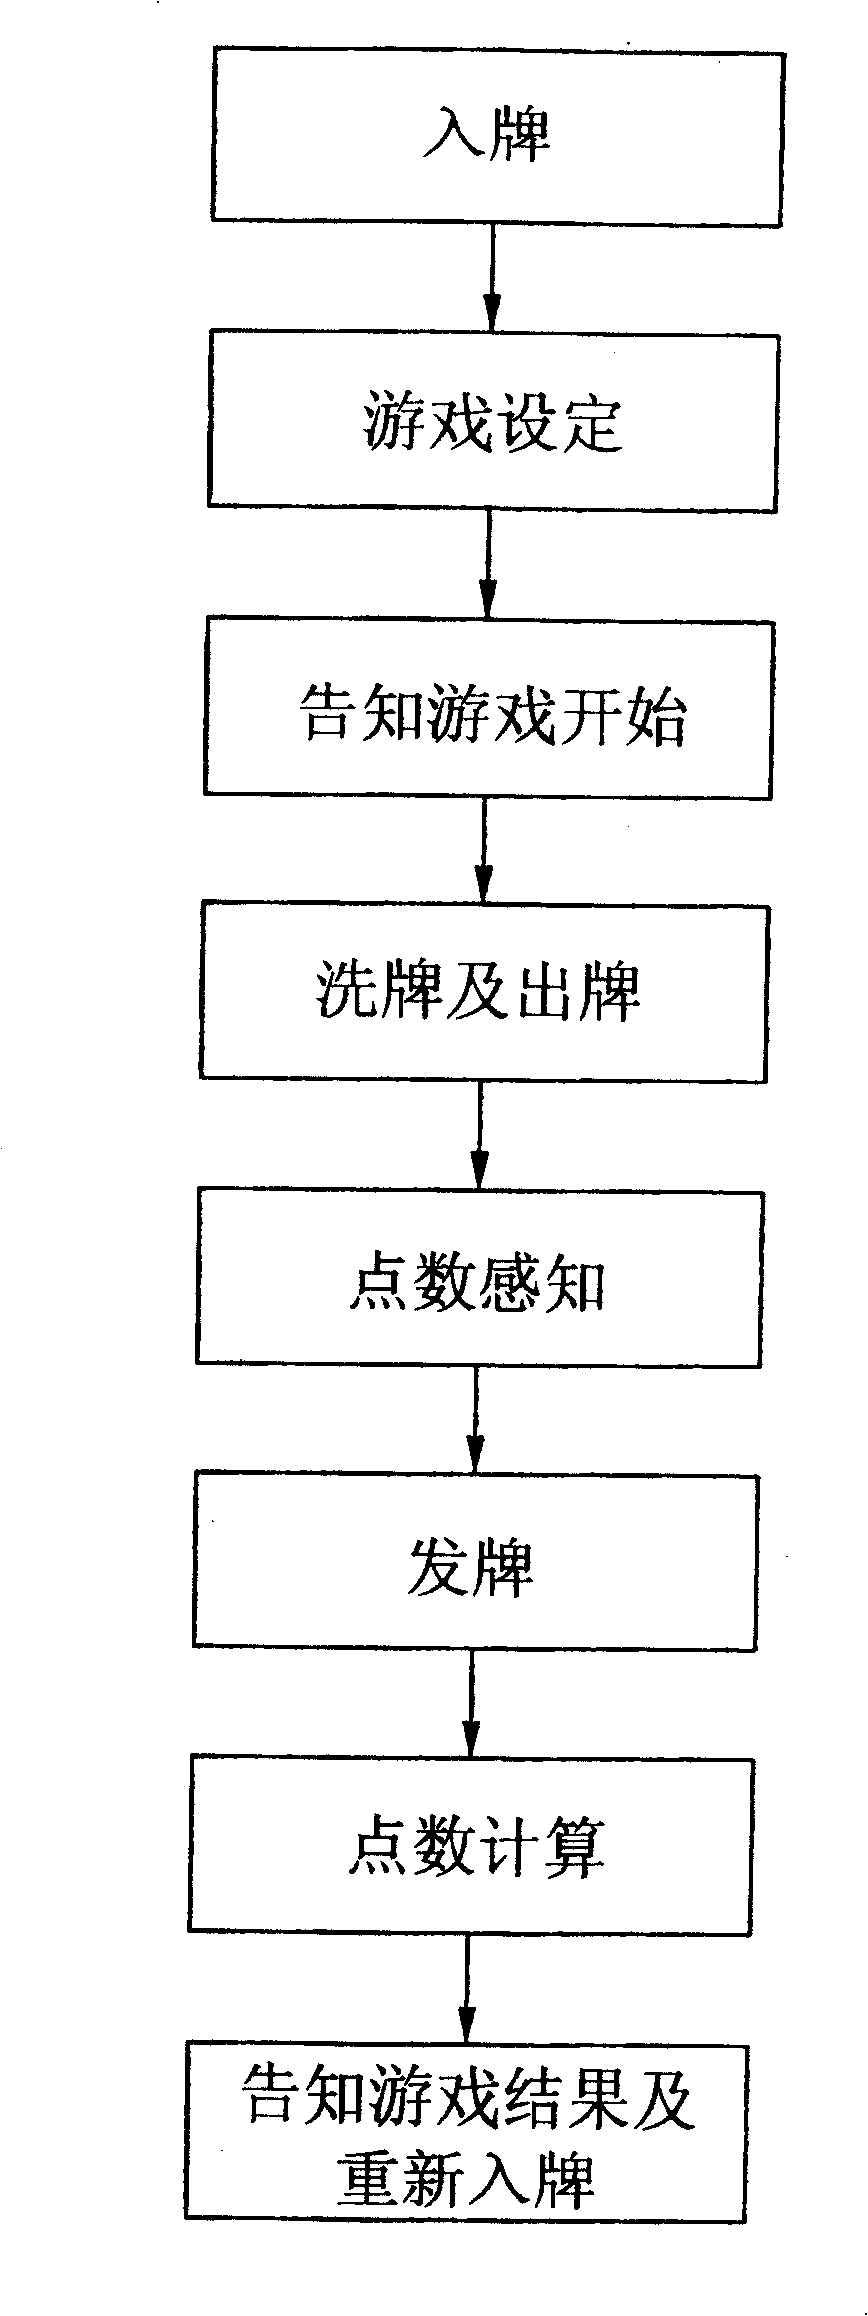 Full-automatic game machine and implementing method